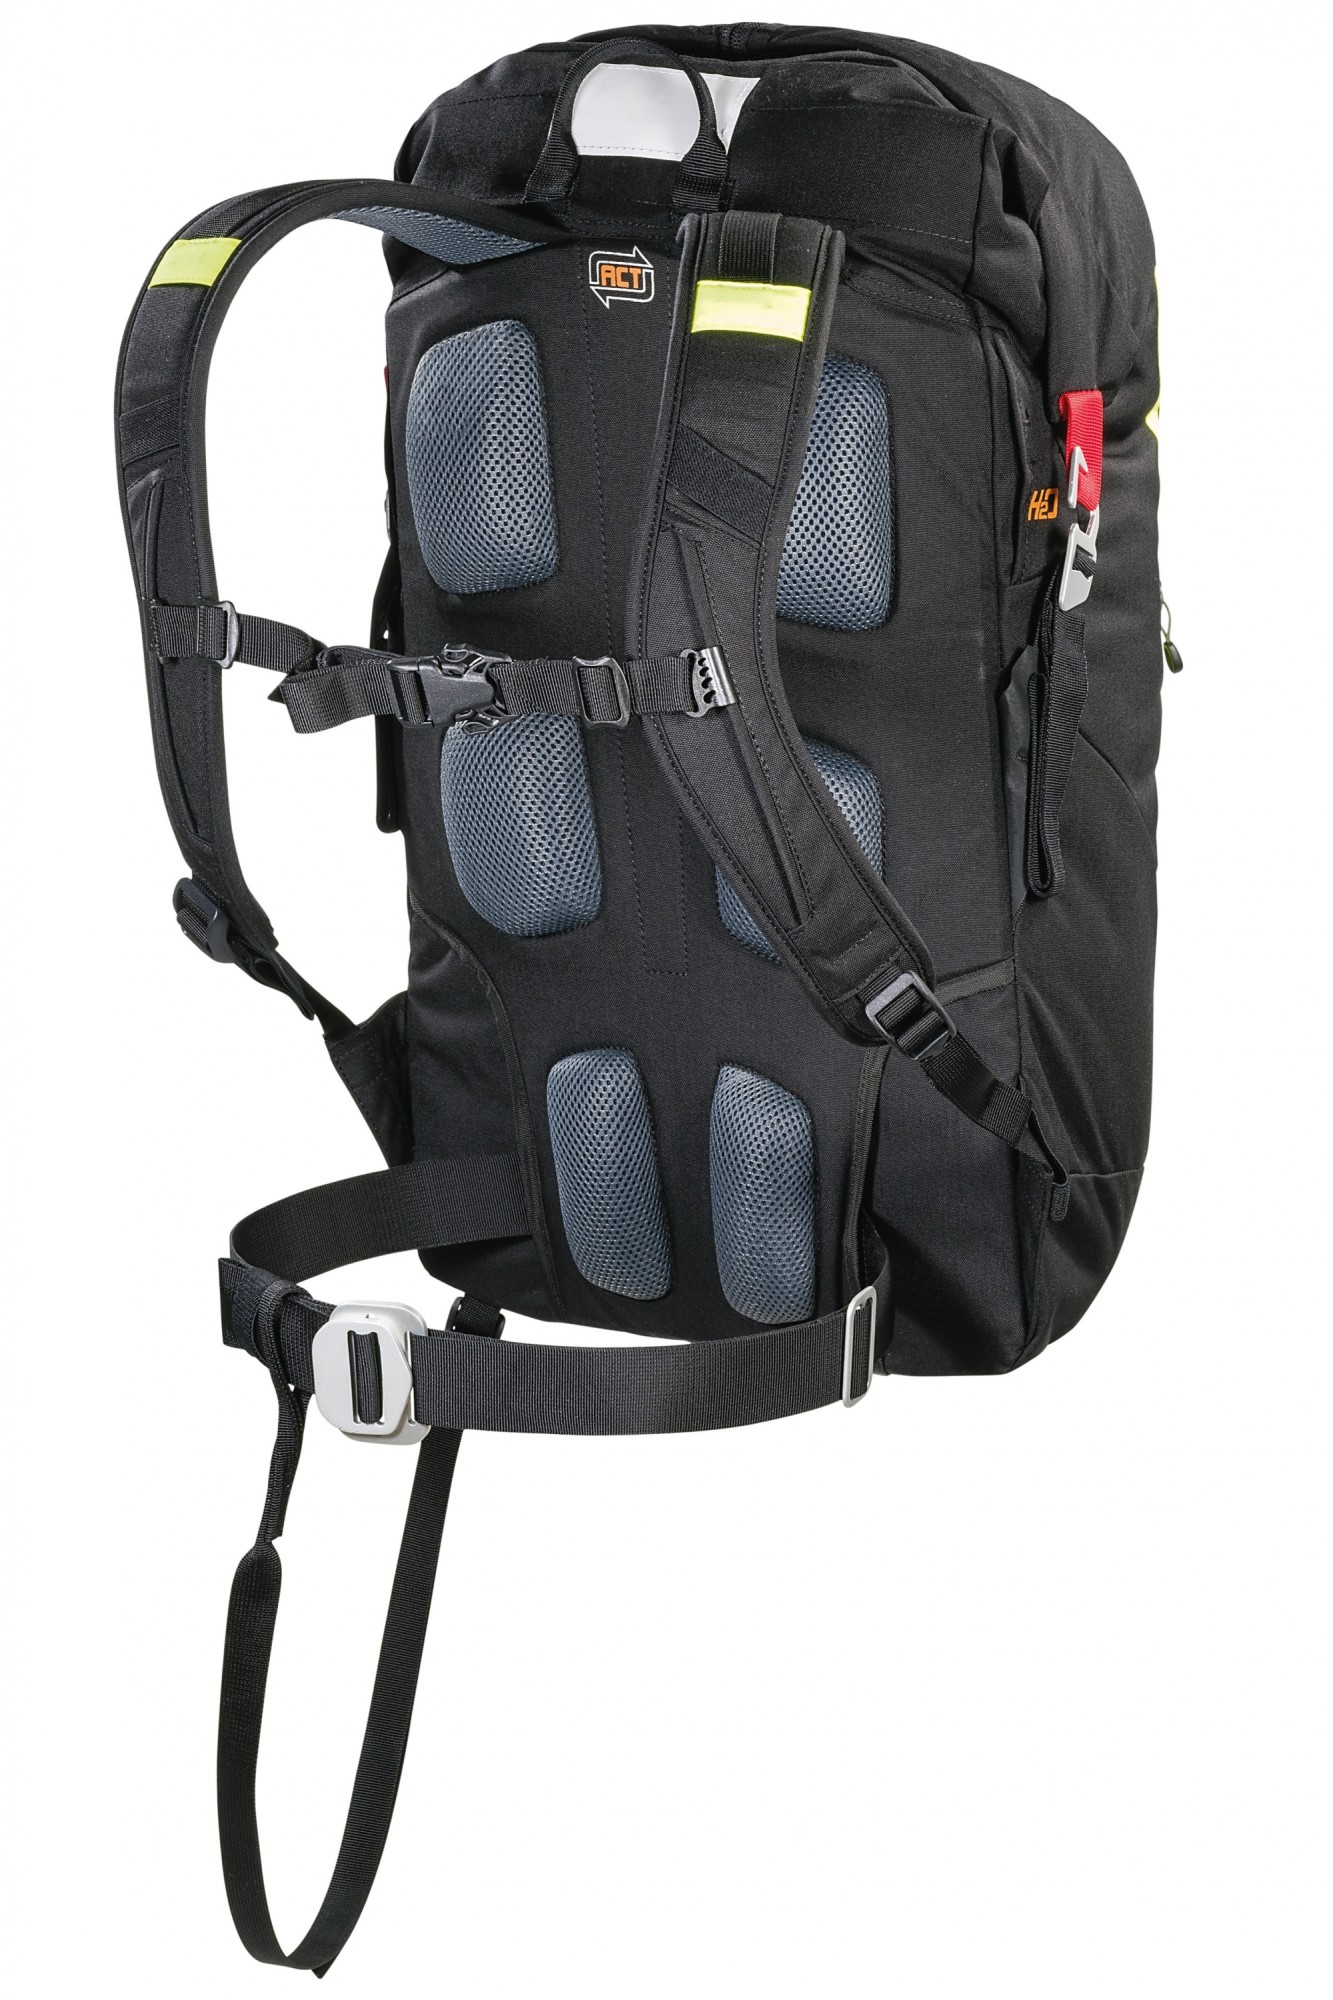 GUARDIAN 50 litres, Mountaineering Backpack